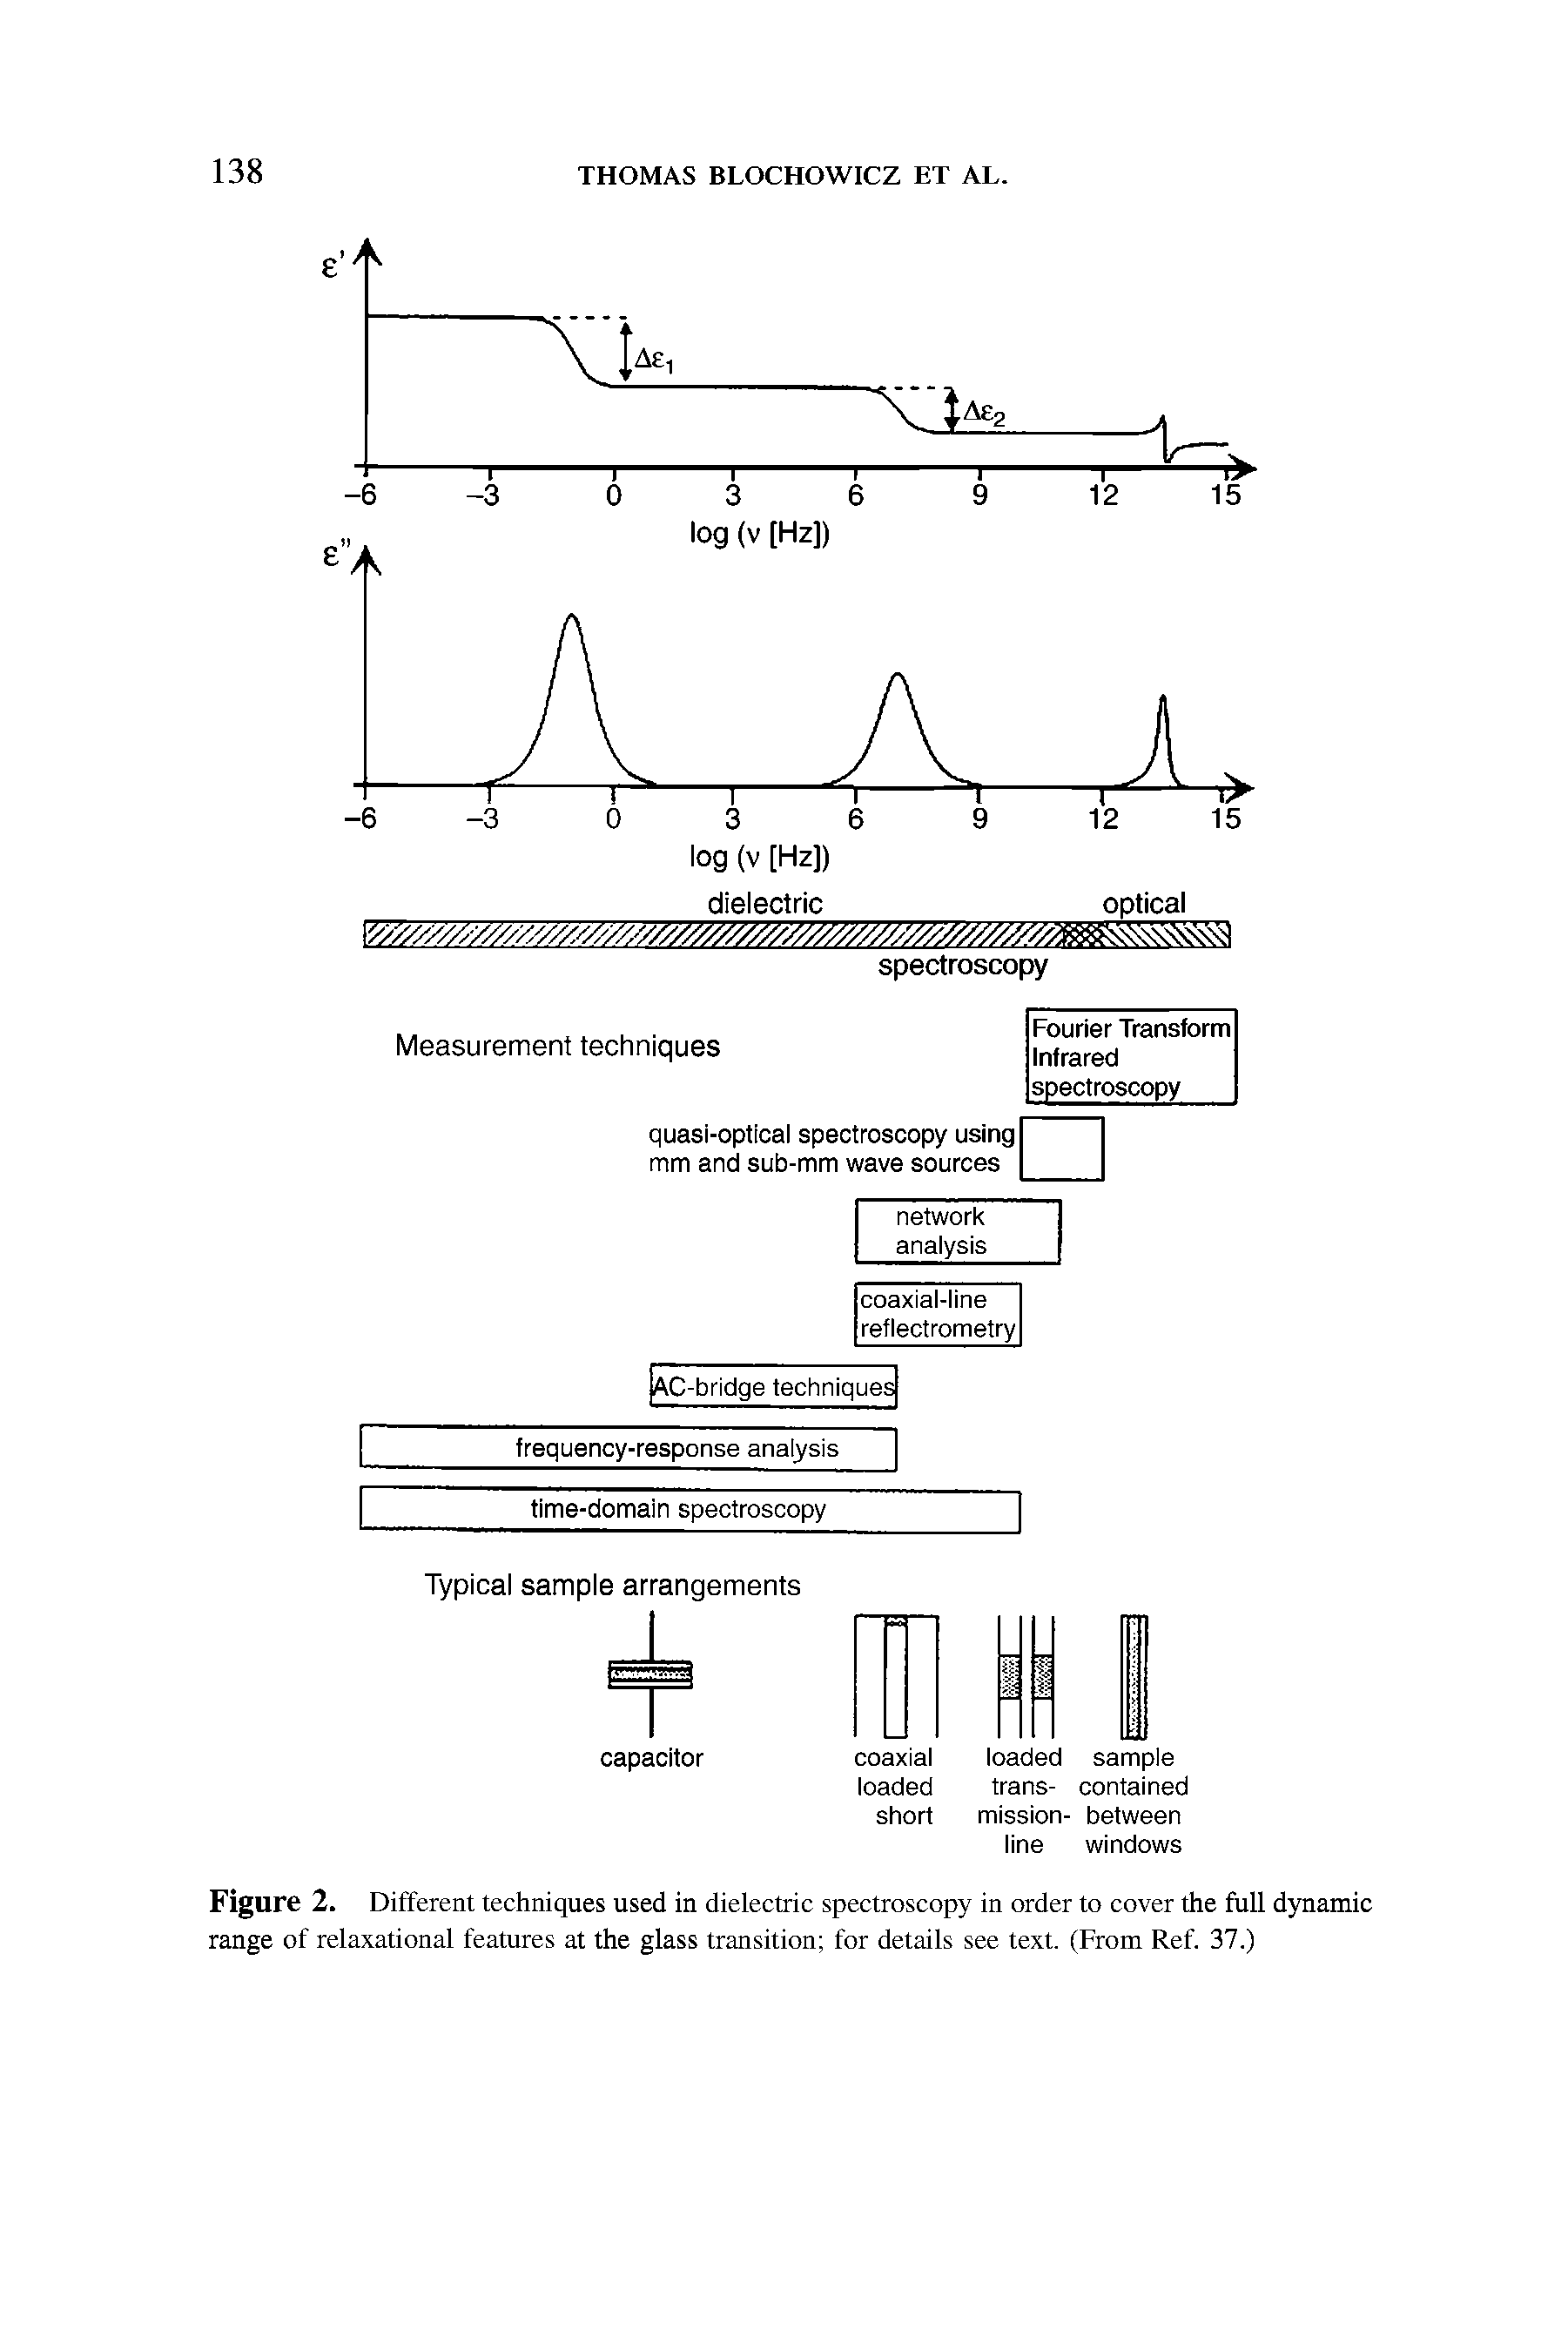 Figure 2. Different techniques used in dielectric spectroscopy in order to cover the full dynamic range of relaxational features at the glass transition for details see text. (From Ref. 37.)...